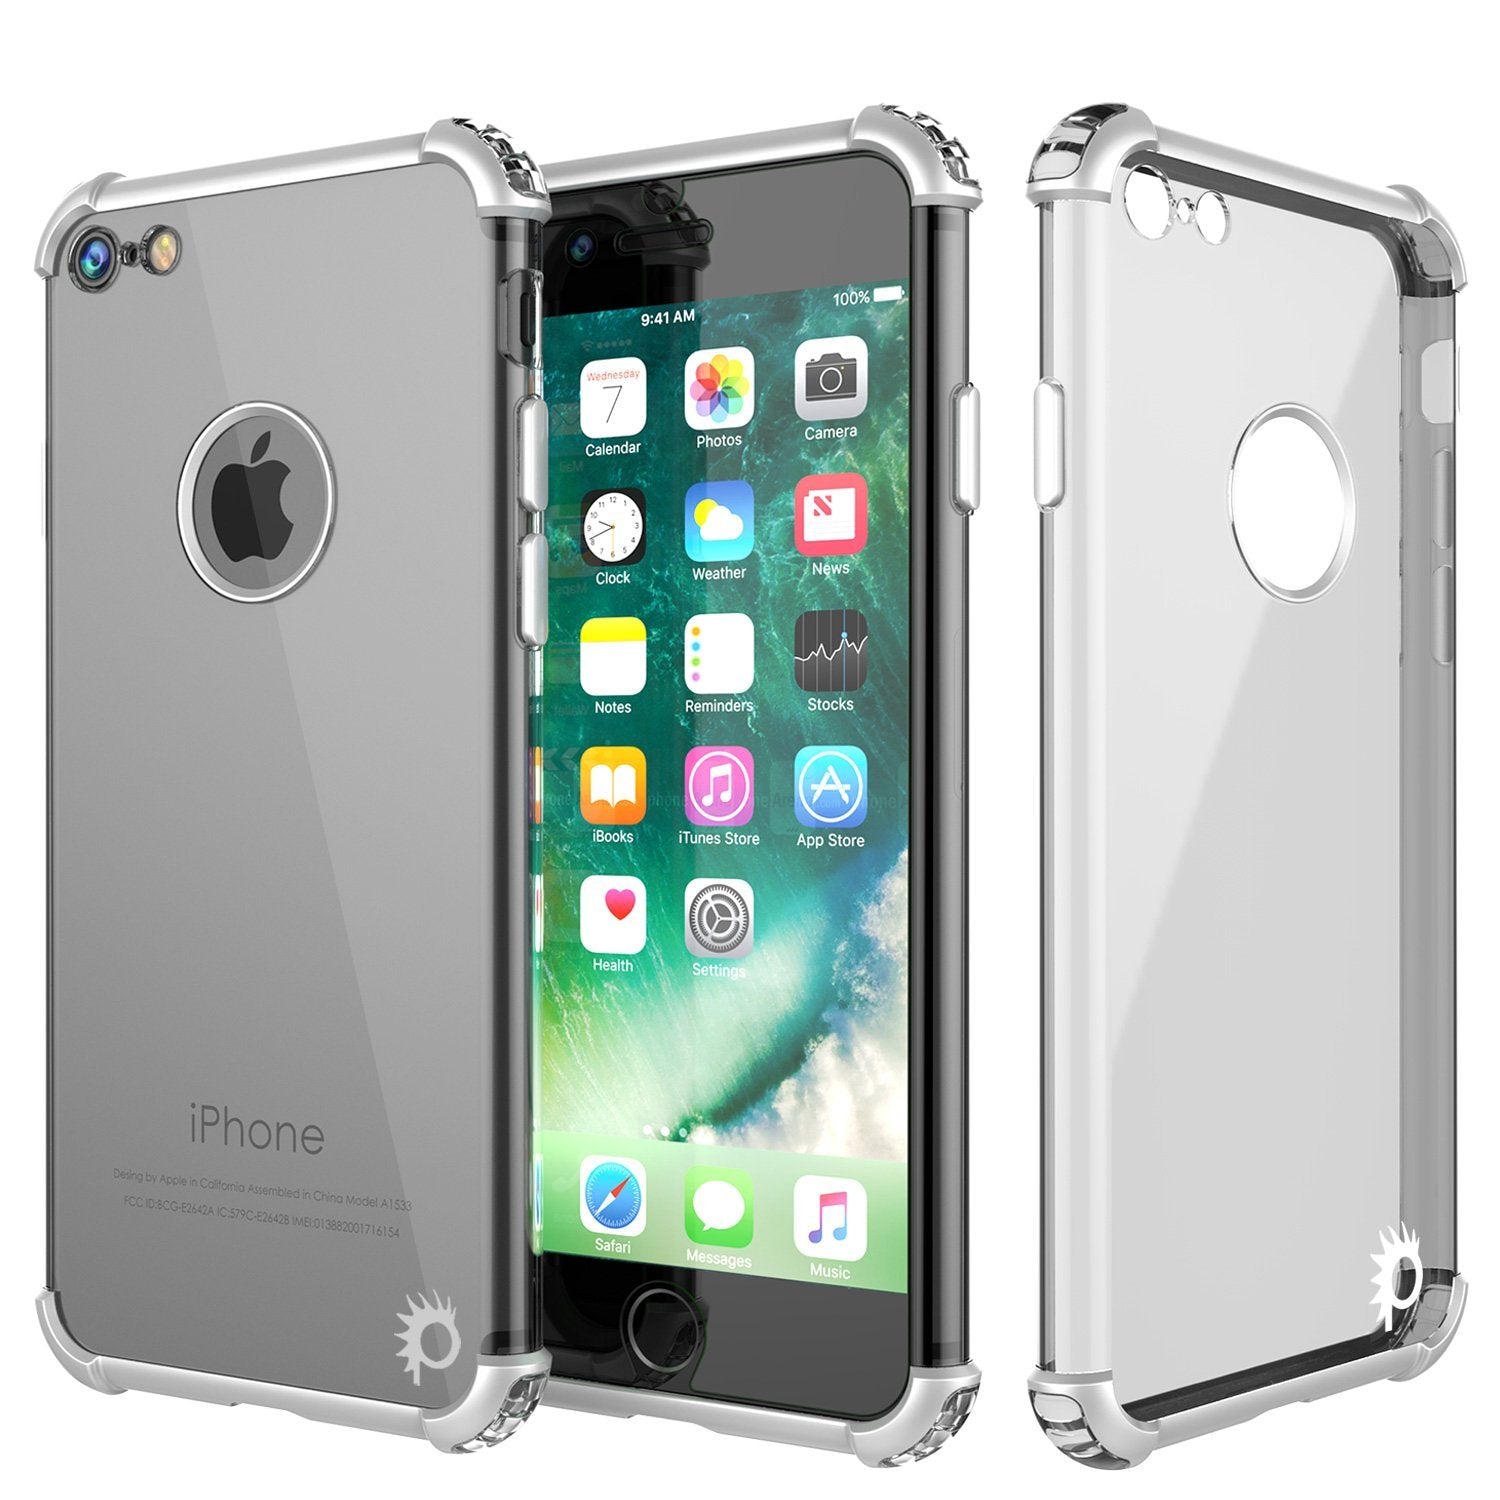 iPhone SE (4.7") Case, Punkcase [BLAZE SERIES] Protective Cover W/ PunkShield Screen Protector [Shockproof] [Slim Fit] for Apple iPhone [Silver]